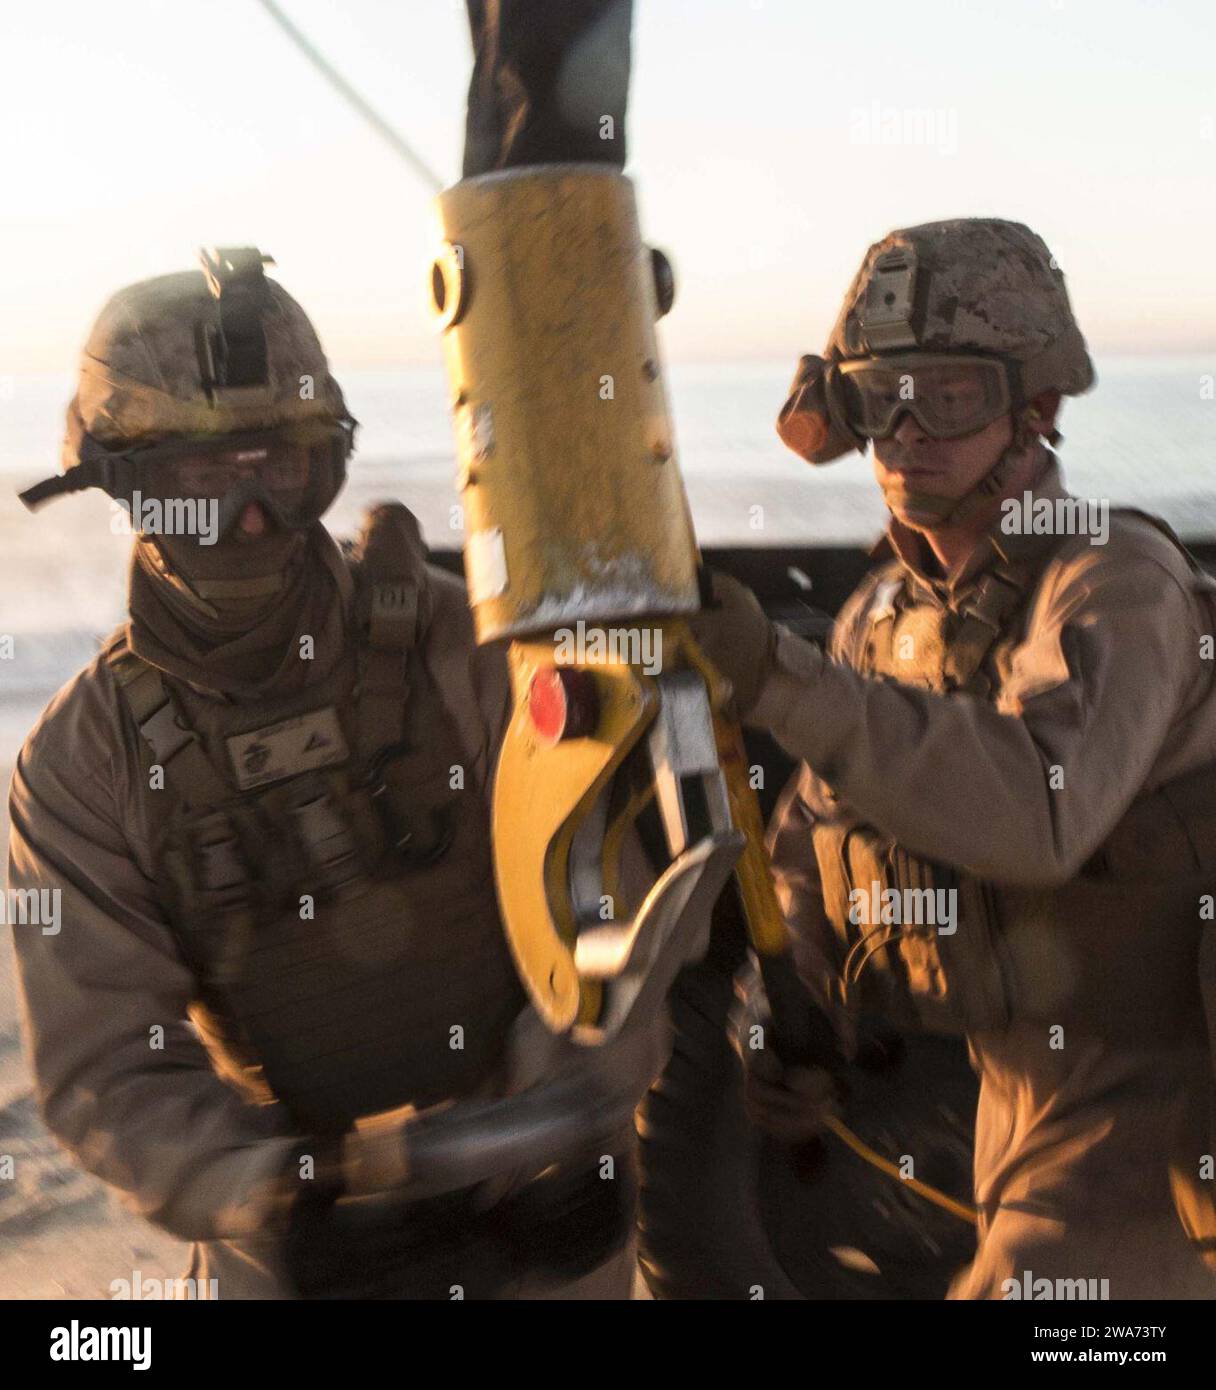 US military forces. 151029WC184-005 PINHEIRO DA CRUZ, PRAIA DA RAPOSA, Portugal – U.S. Marine Lance Cpl. Dustin Mason (left), a landing support specialists, with the Landing Support Detachment, 26th Marine Expeditionary Unit embarked aboard  the amphibious transport dock ship USS Arlington (LPD 24) prepares to attach a sling connected to a M105 trailer to a lifting hook from a CH-53E Super Stallion with Marine Medium Tilt rotor Squadron 162 (VMM-162), 26th MEU, embarked aboard the USS Arlington hovering overhead, while U.S. Marine Lance Cpl. Micah English (right), a landing support specialists Stock Photo